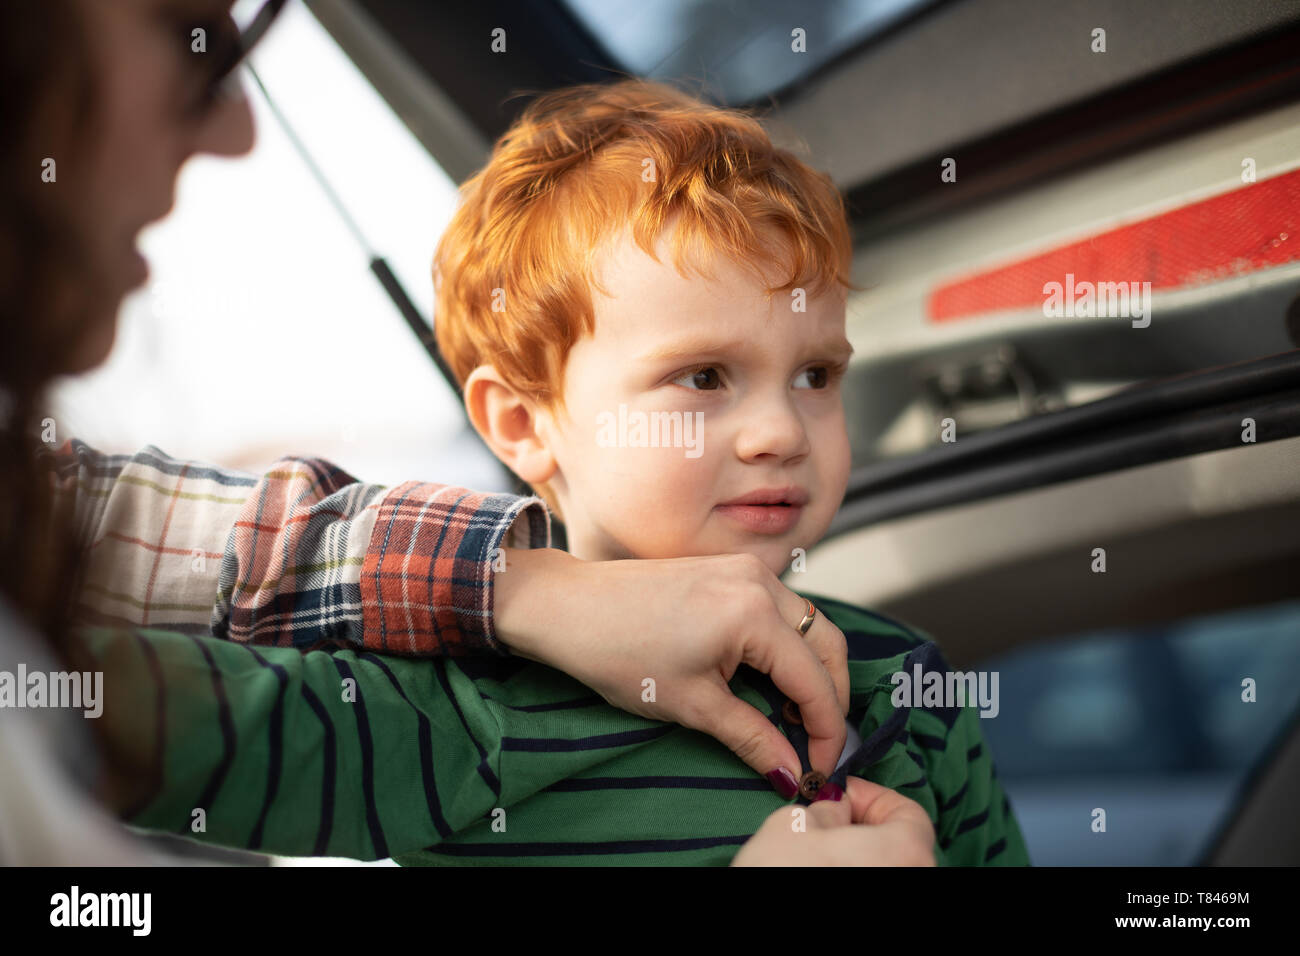 Boy getting fresh change of clothes at car boot Stock Photo